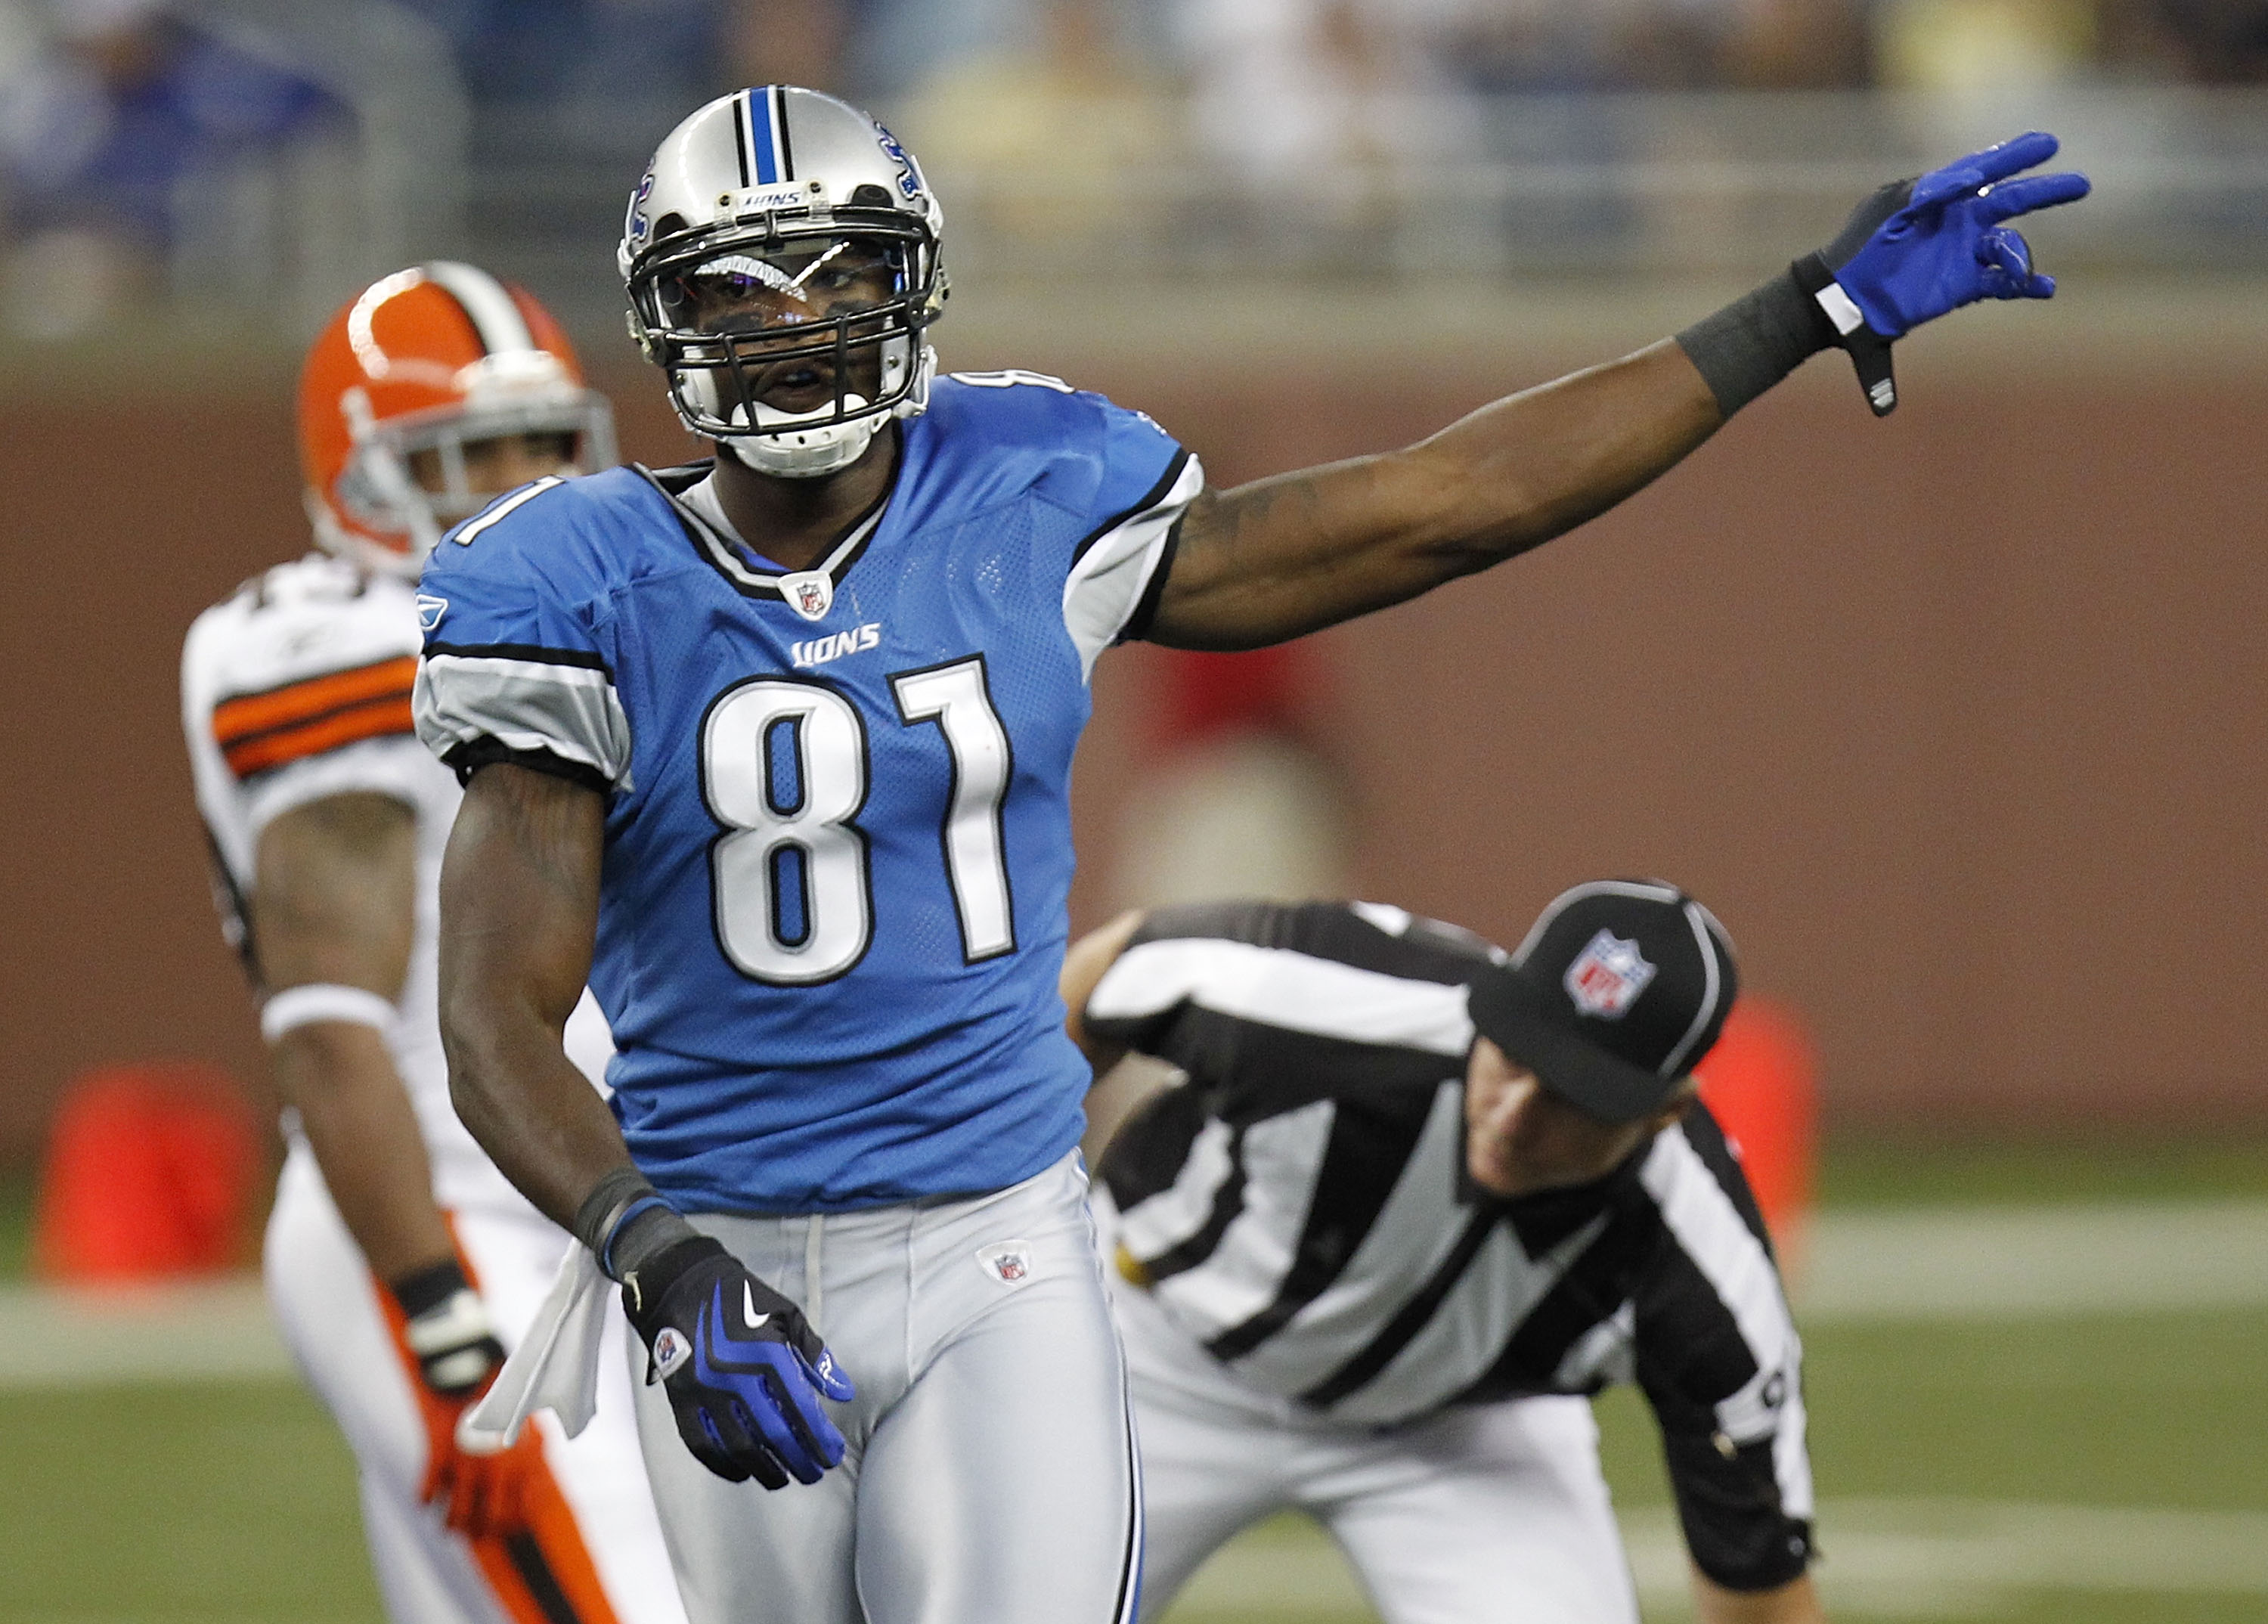 DETROIT - AUGUST 28: Calvin Johnson #81 of the Detroit Lions signals a first down after a second quarter catch during a preseason game against the Cleveland Browns on August 28, 2010 at Ford Field in Detroit, Michigan.  (Photo by Gregory Shamus/Getty Imag